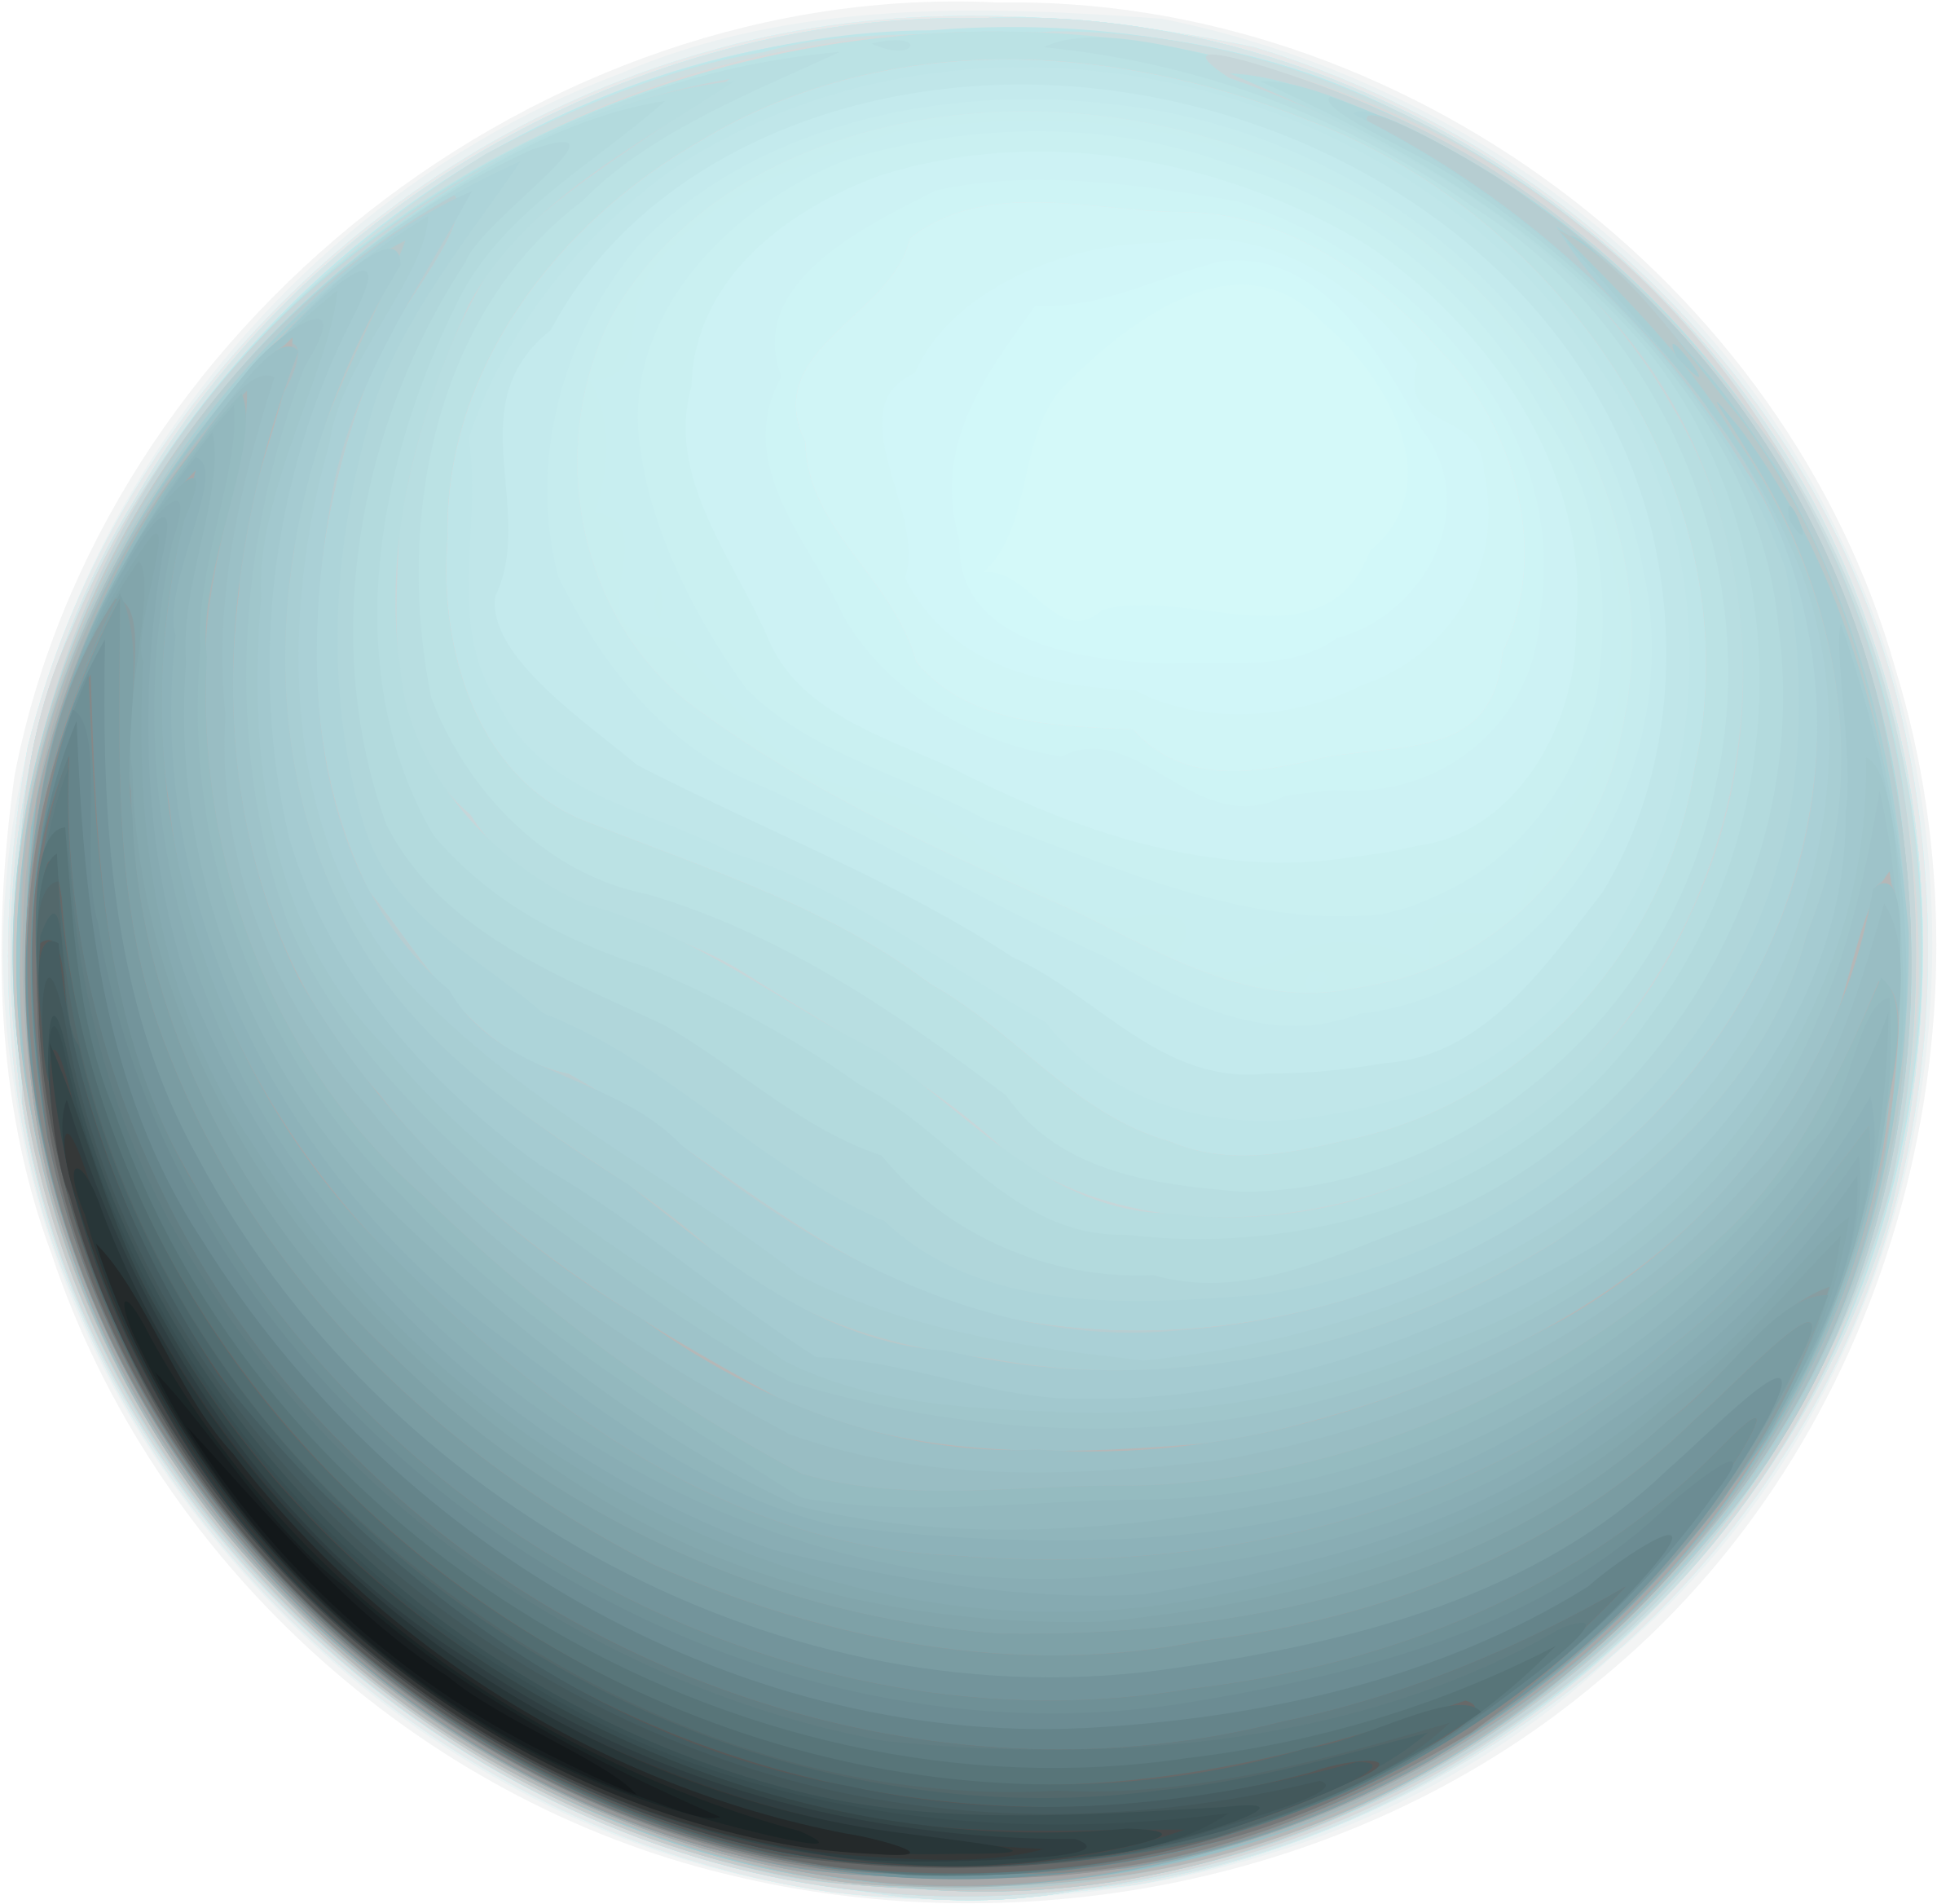 A White Ball With Black Background